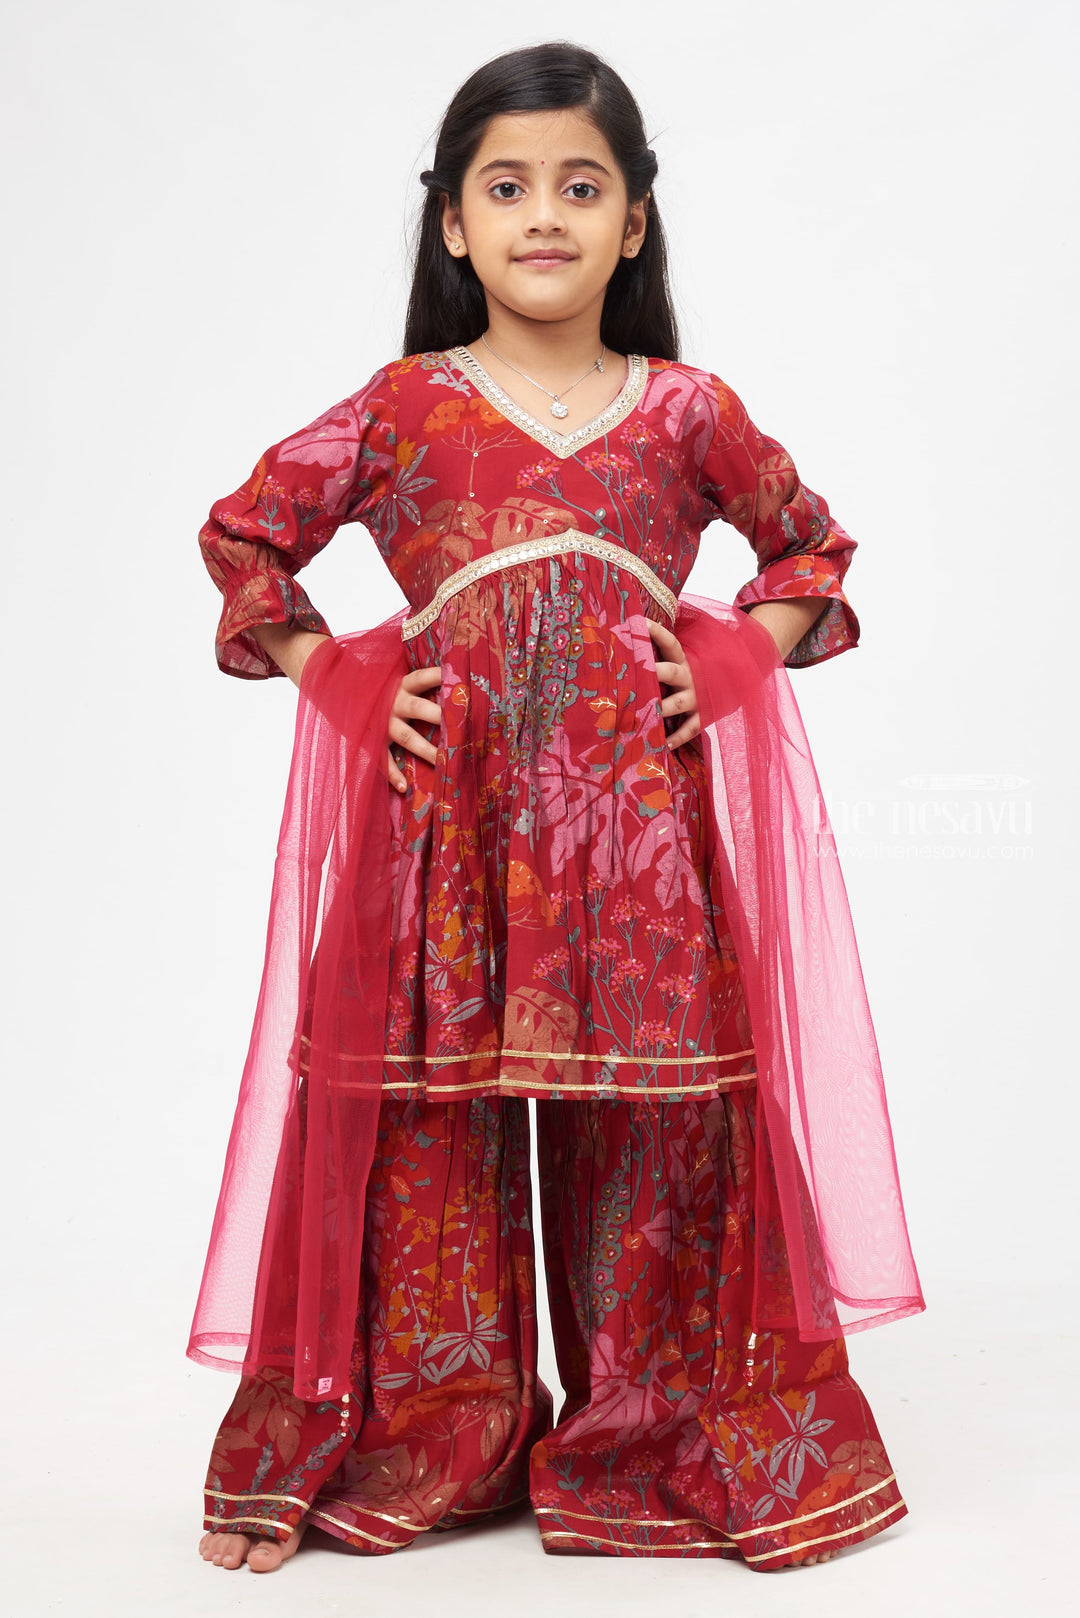 The Nesavu Girls Sharara / Plazo Set Royal Garnet Kurti Suit with Gharara Pants - Enthralling Floral Elegance for Girls Nesavu 16 (1Y) / Red / Modal Chanderi GPS217B-16 Girls Garnet Anarkali Suit with Gharara Pants | Intricate Floral Patterns | Luxurious Ethnic Wear for Special Celebrations